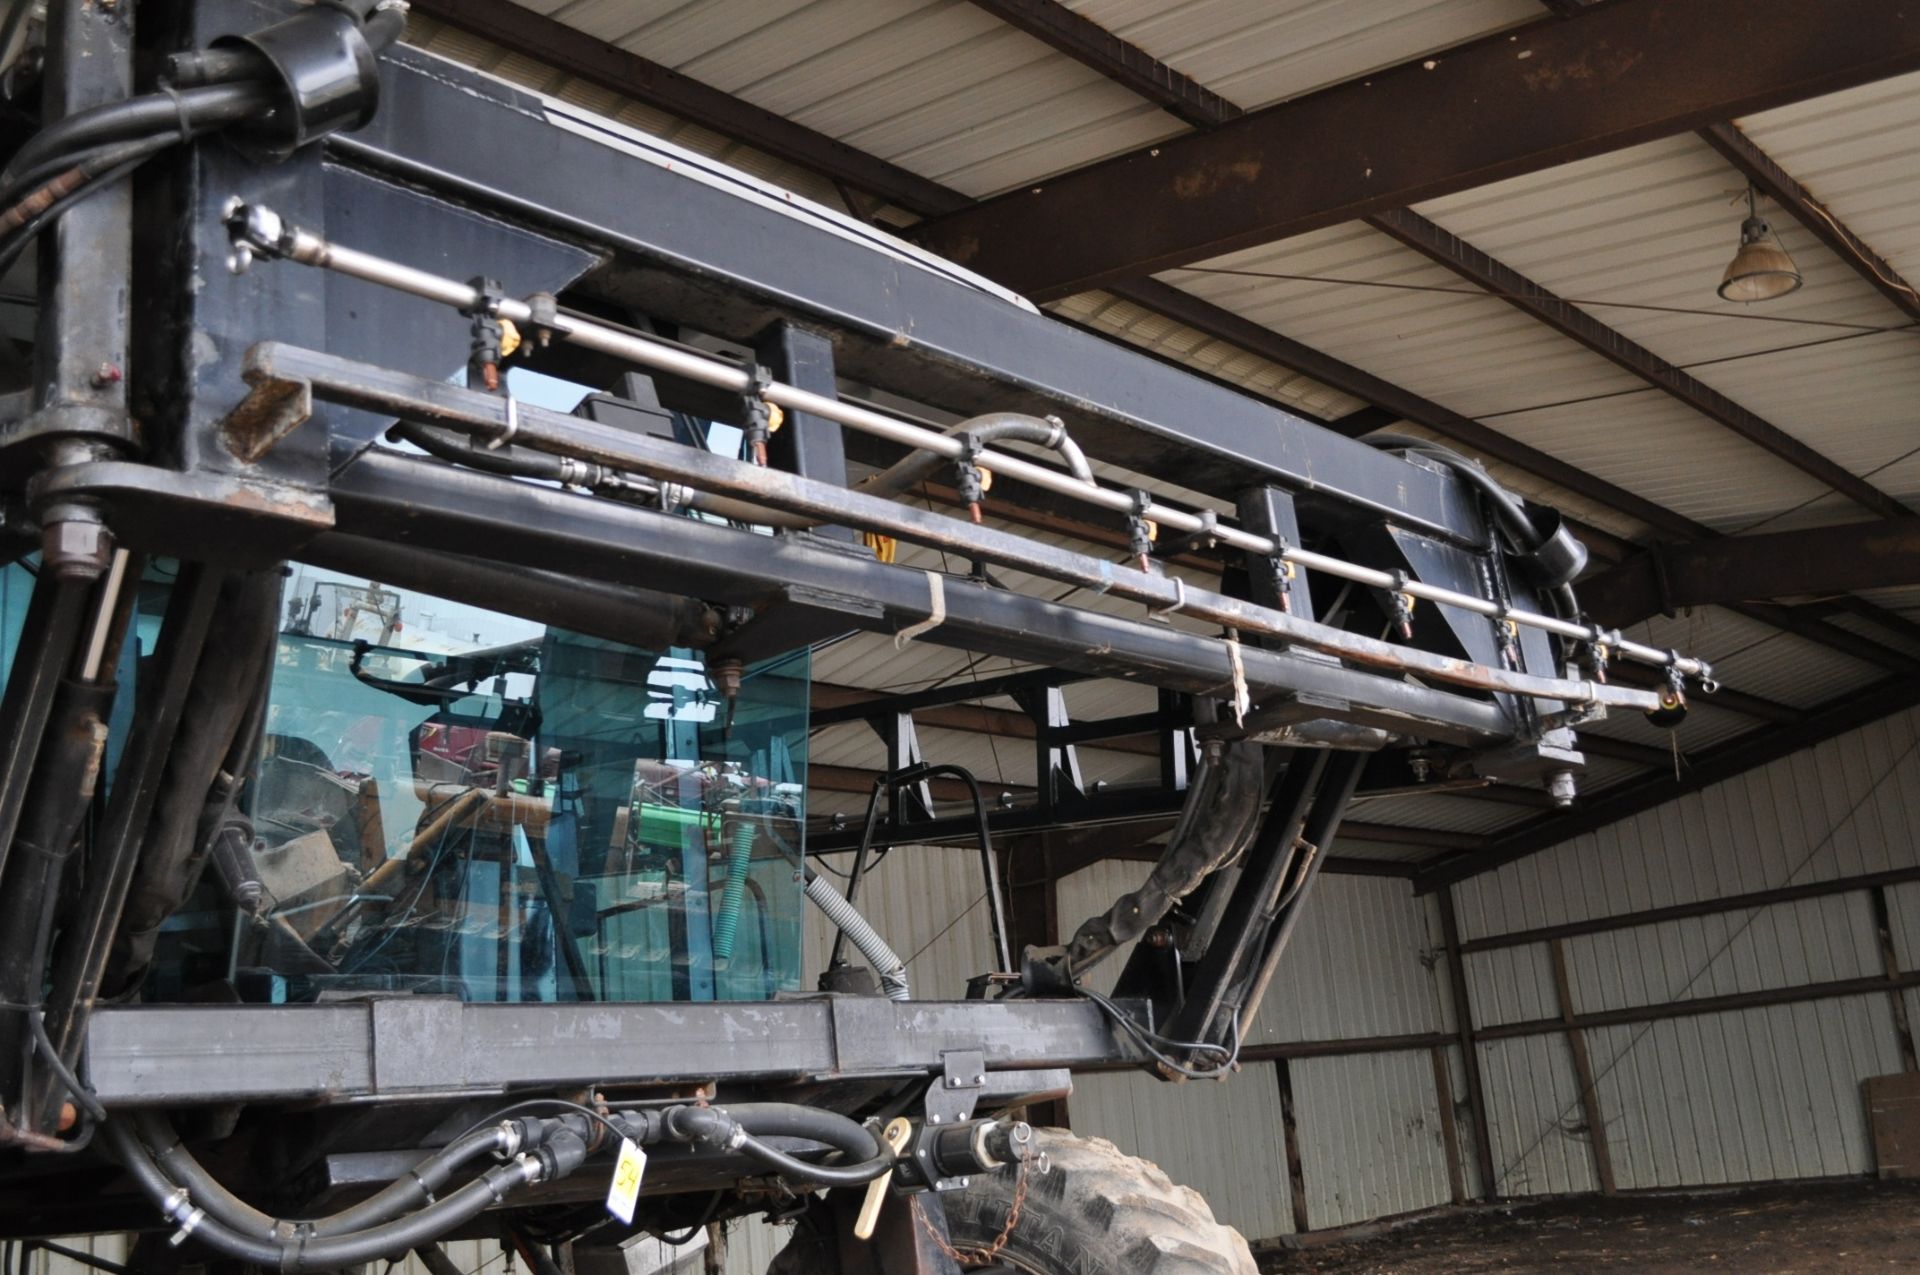 Silver Wheels Voyager 2000 sprayer, 14.9R46 tires, hydrostatic, 90’ boom, 15” nozzle spacing, 1000 - Image 11 of 21